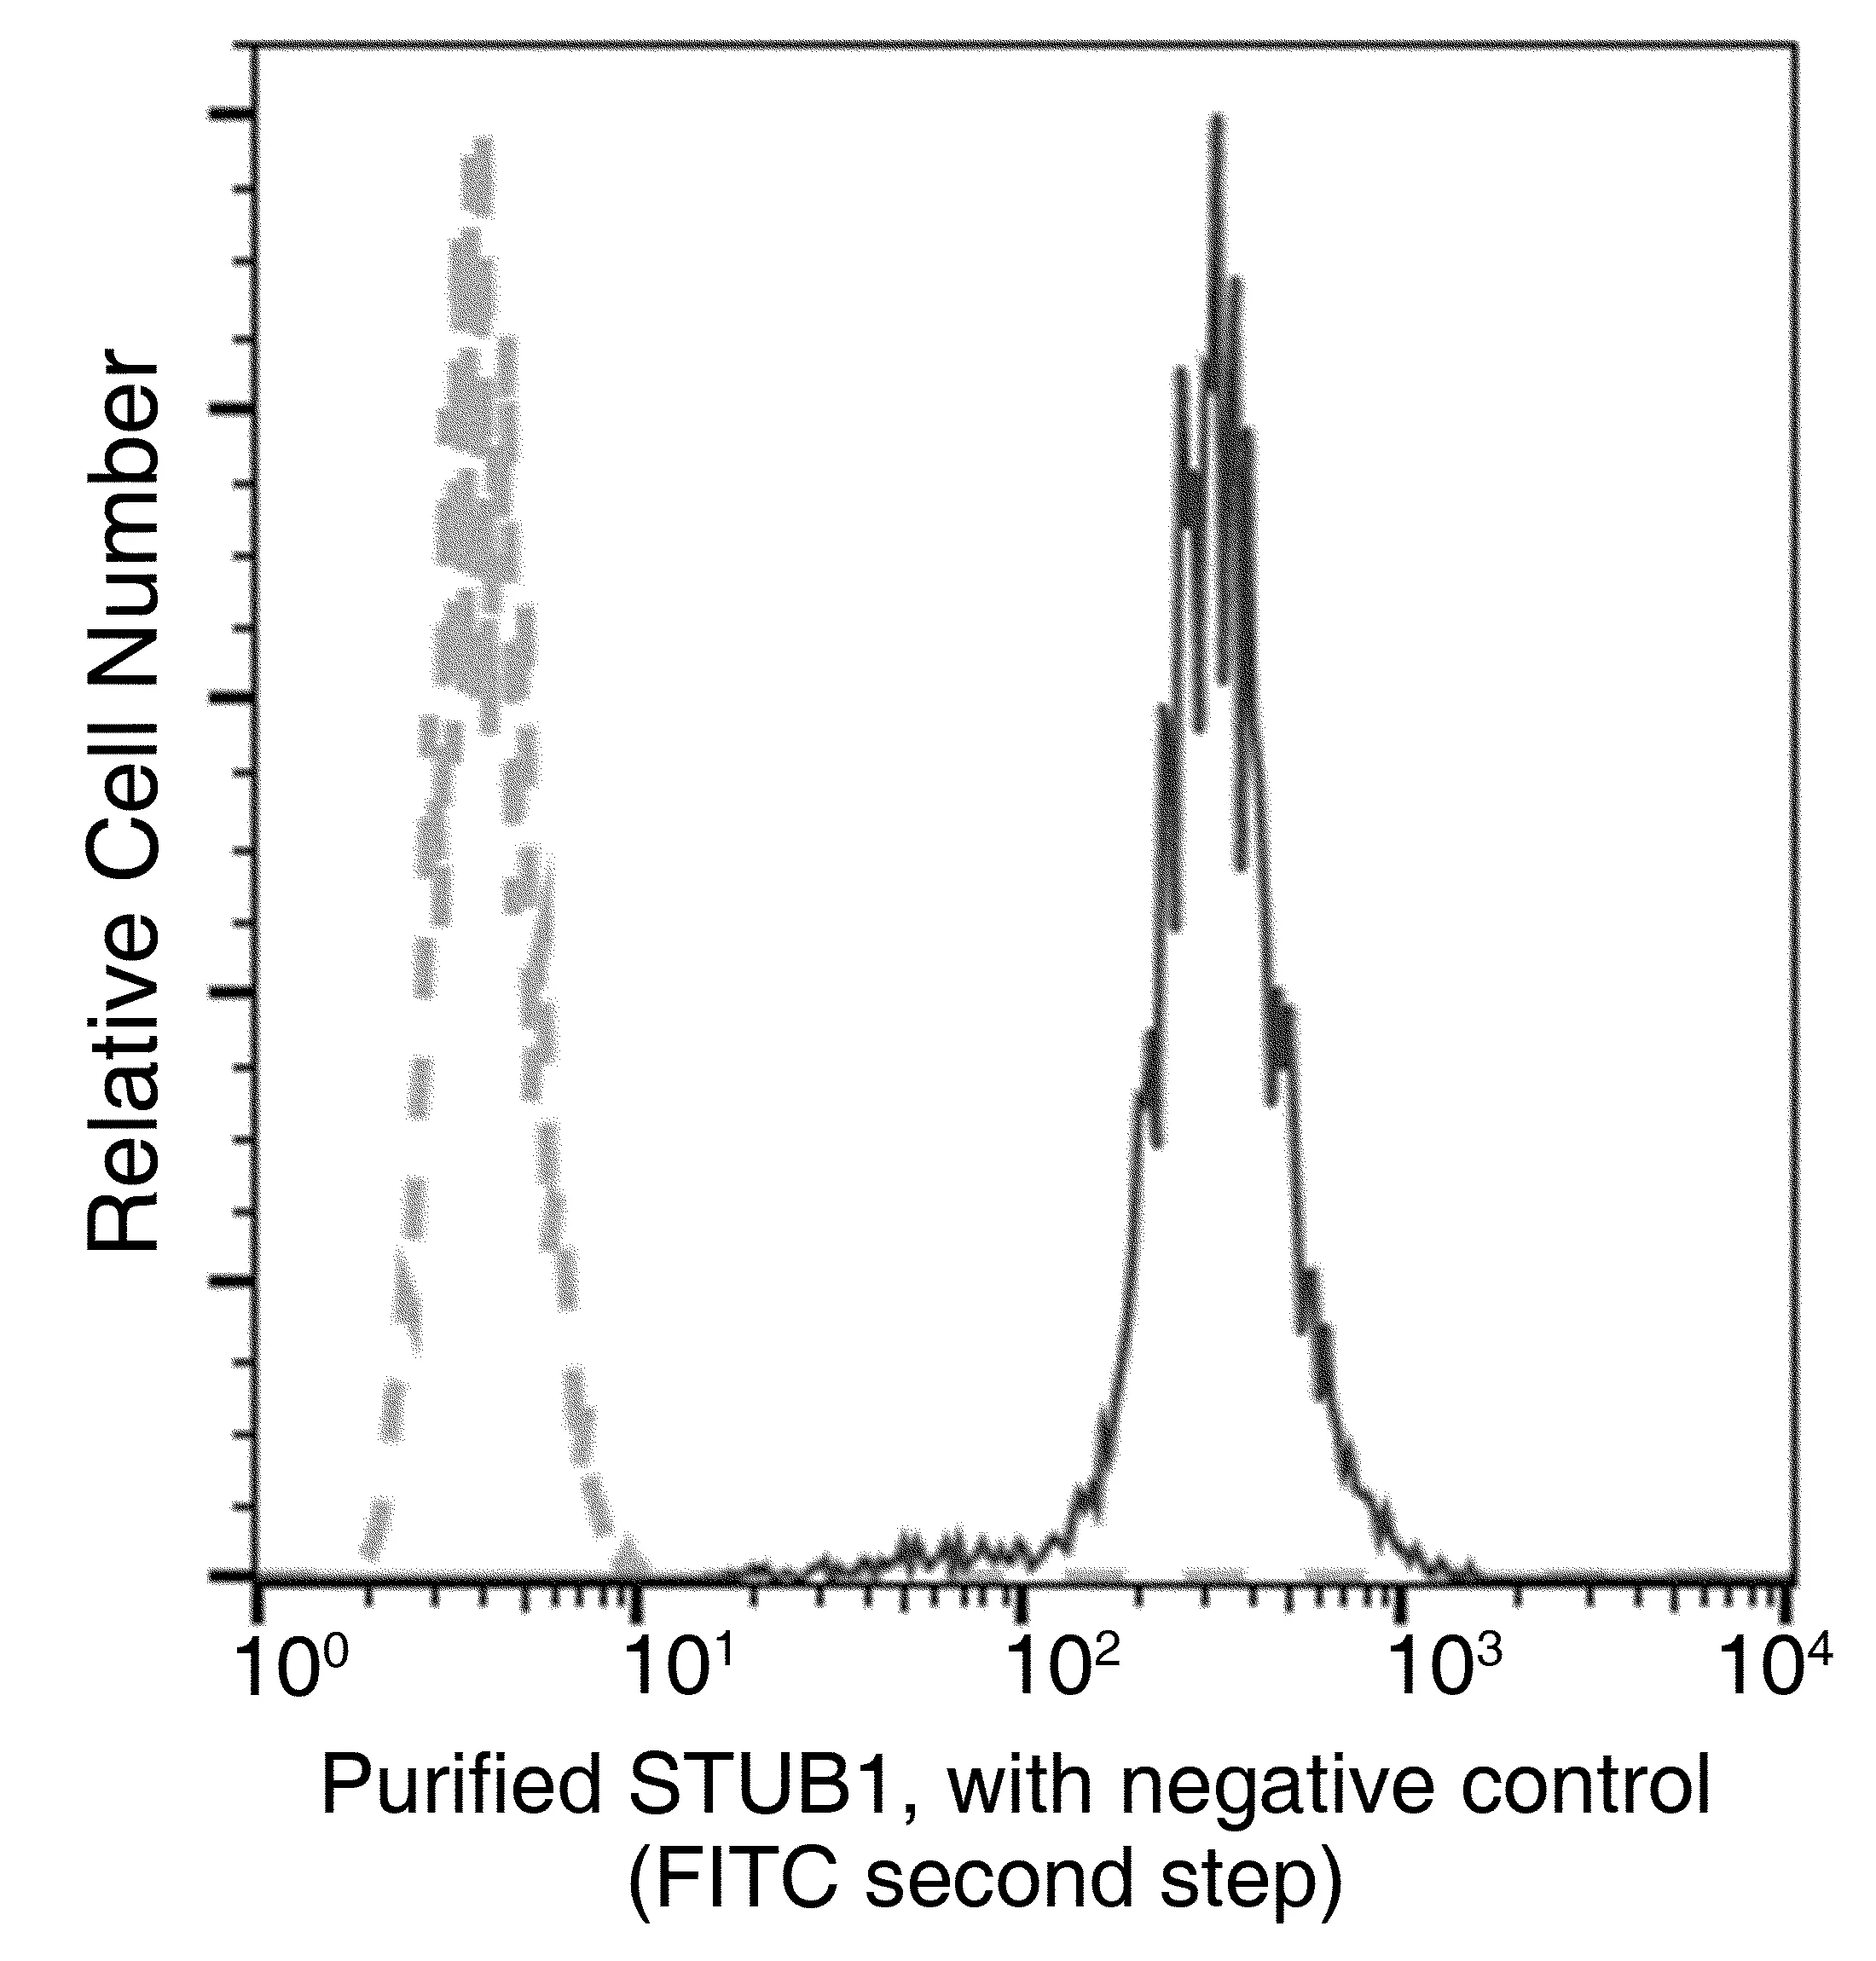 FACS analysis of HeLa cells using GTX02047 STUB1 antibody [034].<br>The fluorescence histograms were derived from gated events with the forward and side light-scatter characteristics of intact cells.